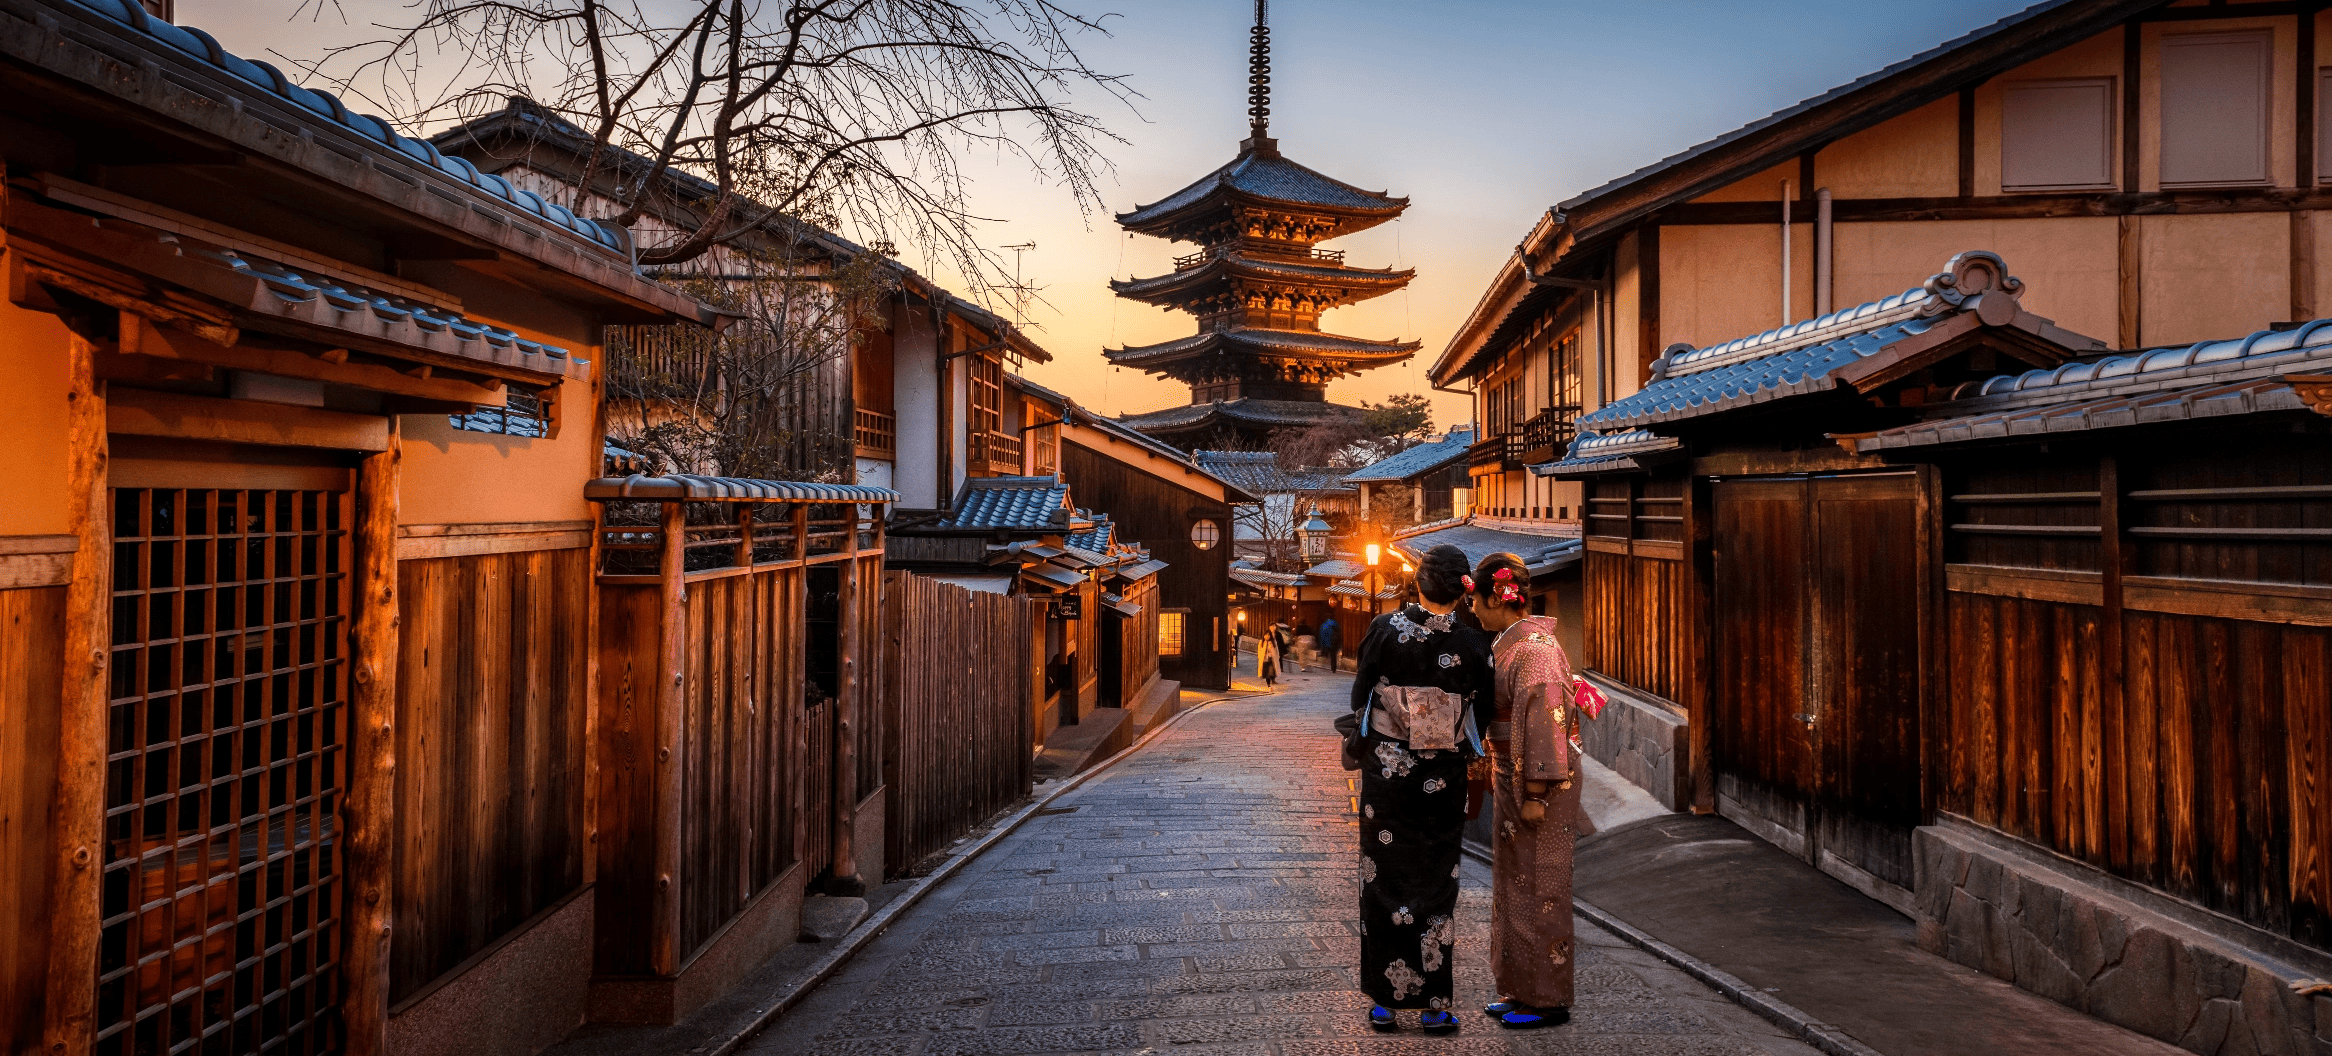 b)	Two women wearing kimonos hold their heads close in conversation on a historic Japanese street with a pagoda in the foreground at sunset.